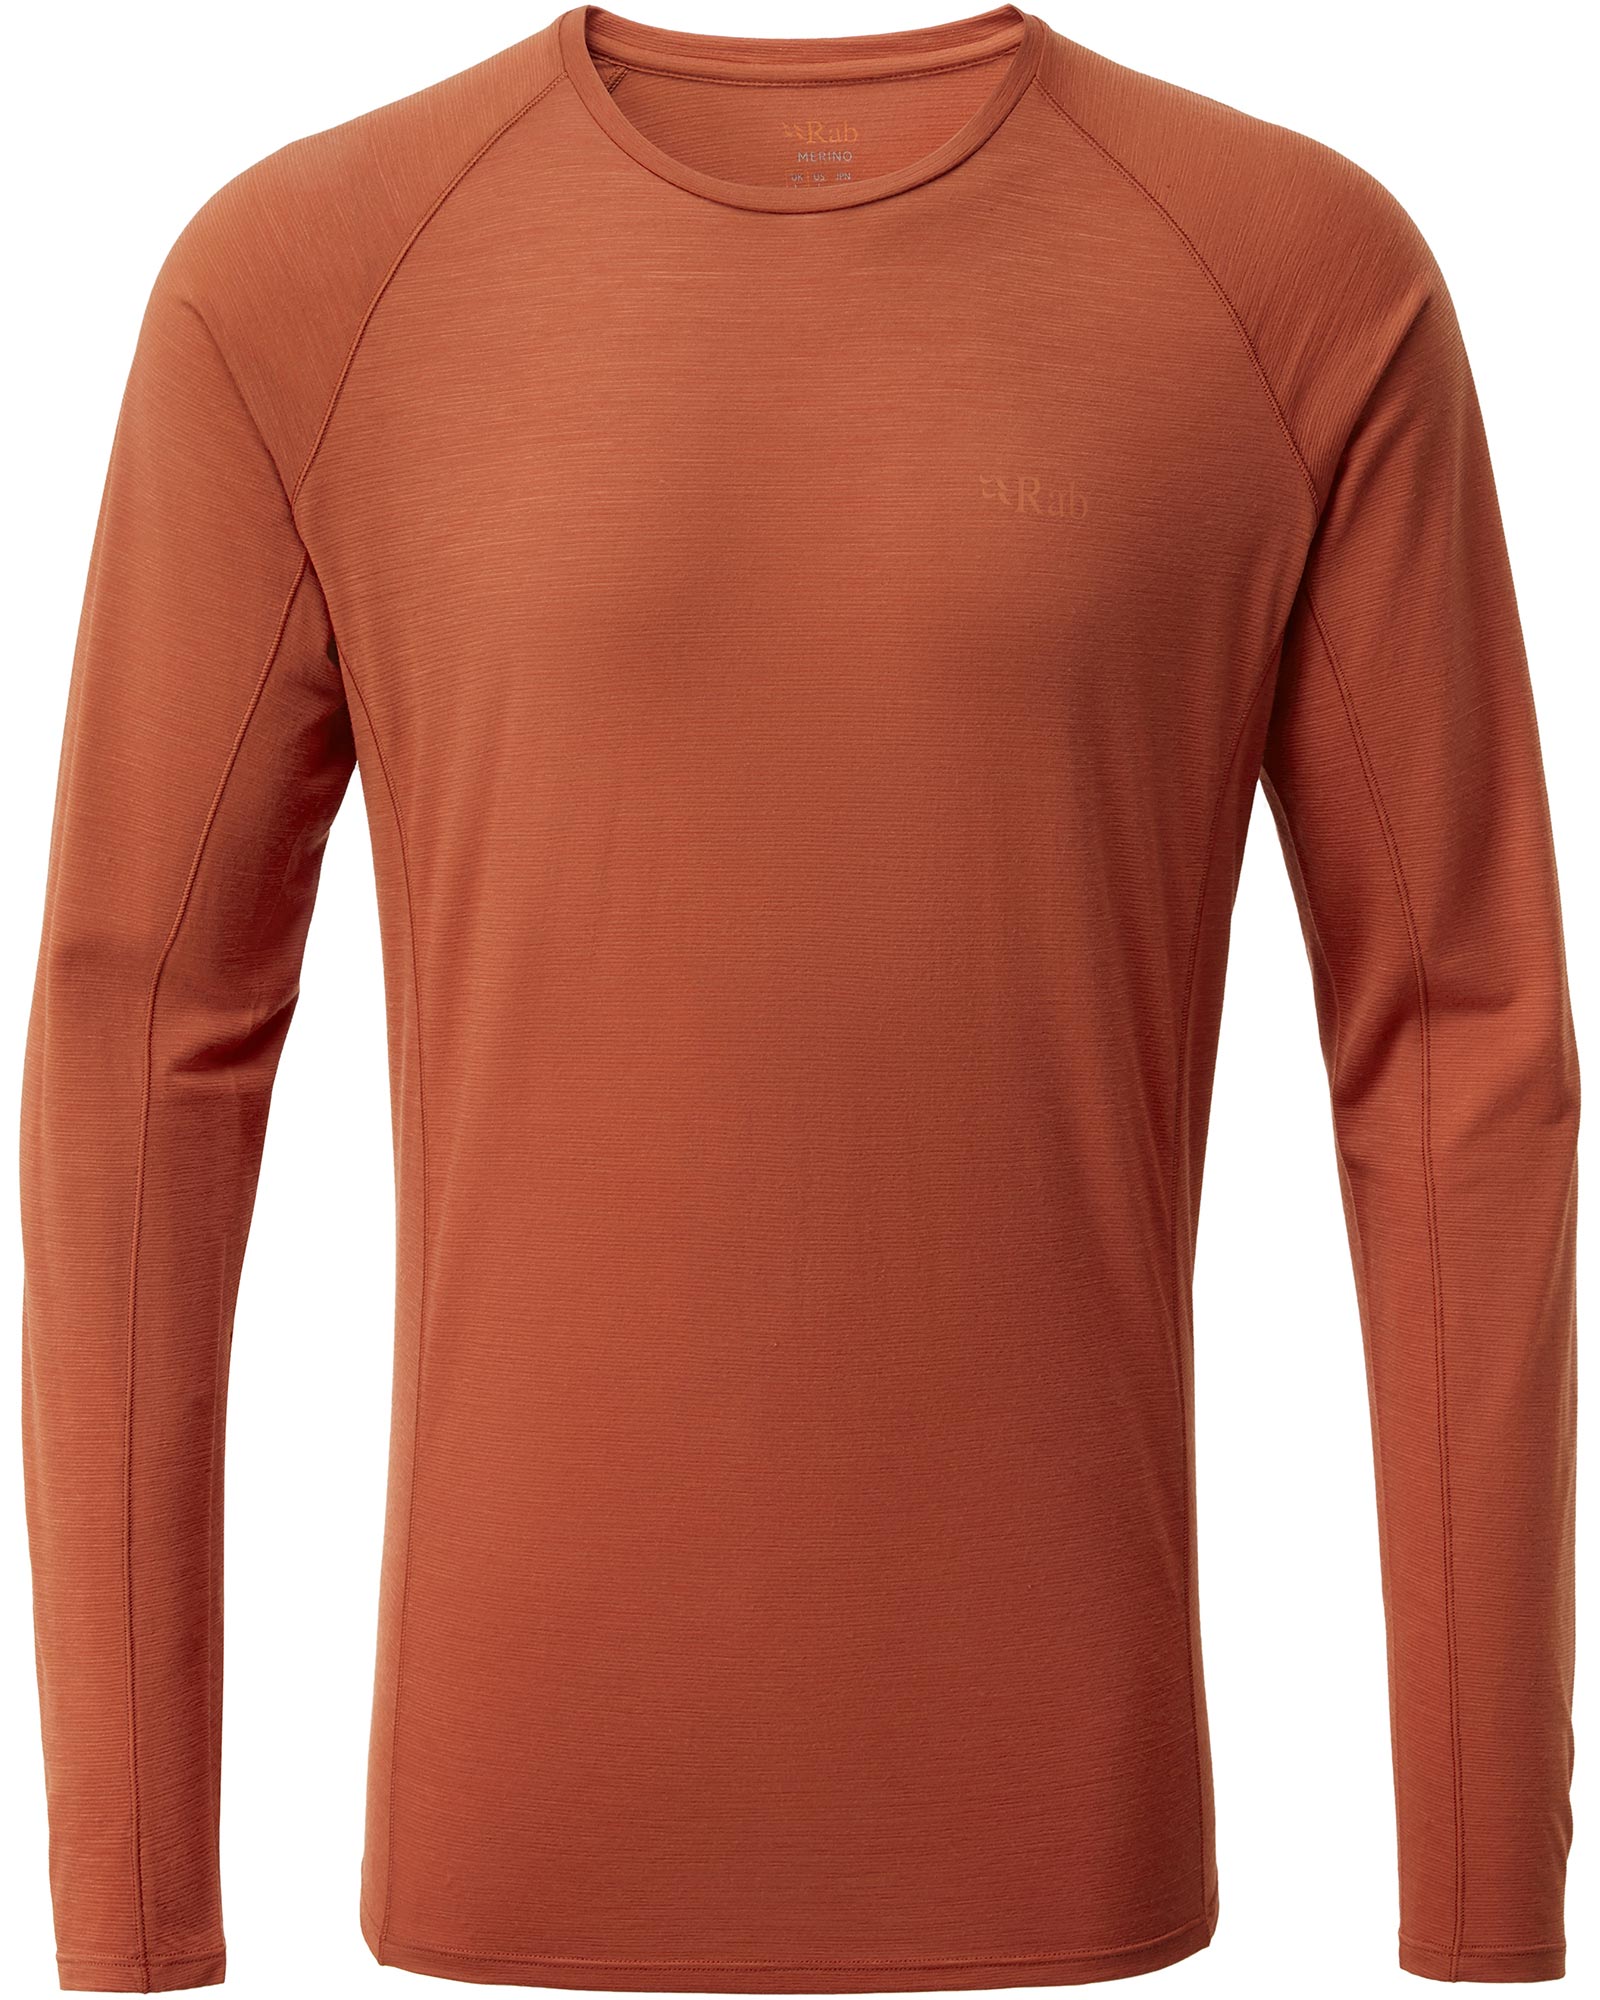 Rab Forge Merino Men’s Long Sleeve T Shirt - Red Clay S